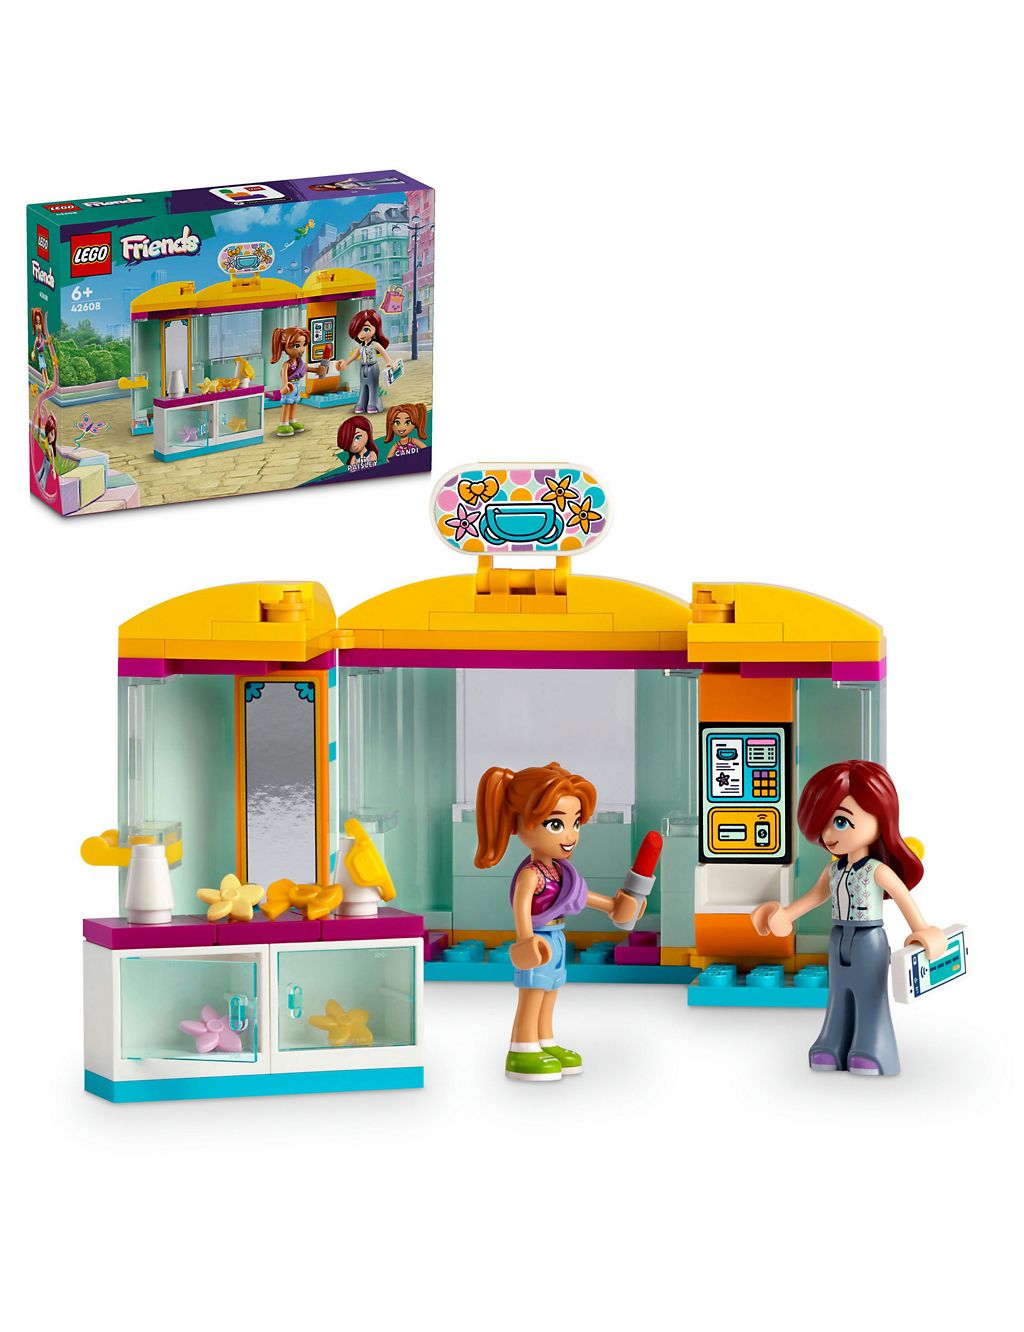 LEGO® Friends Tiny Accessories Shop Toy 42608 (6+ Yrs) 3 of 4